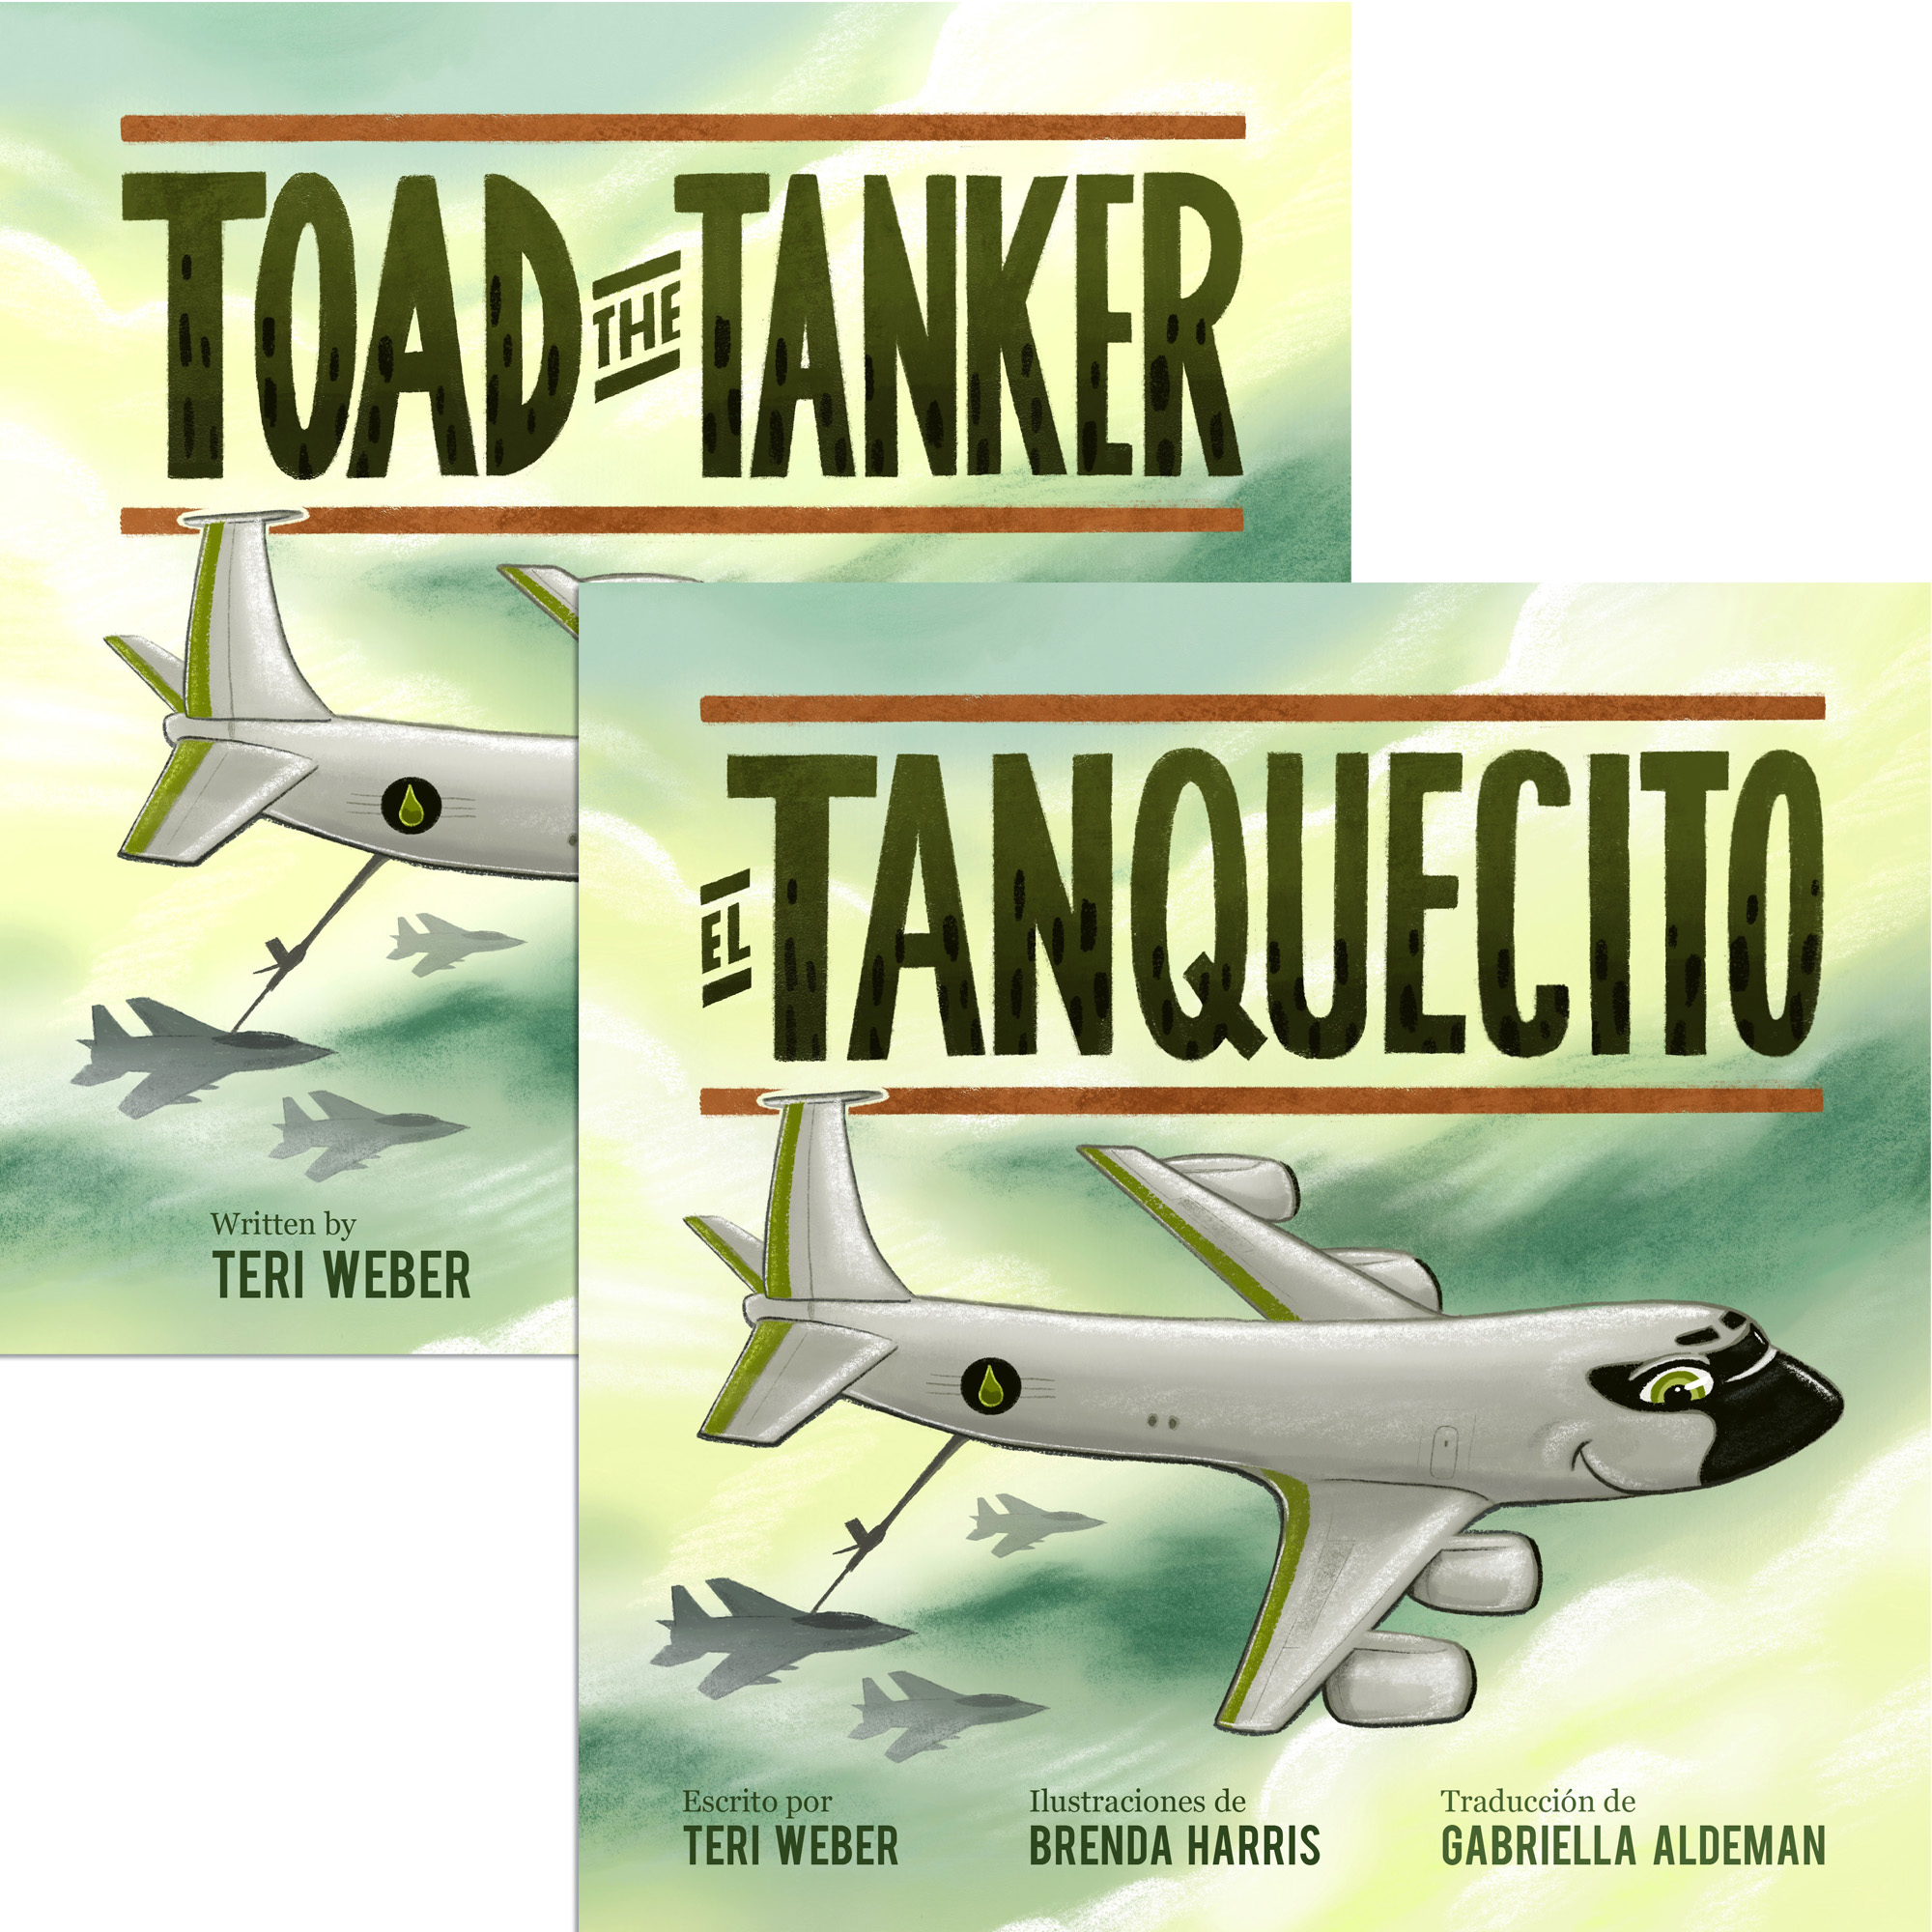 Toad the Tanker (English) and El Tanquecito (Spanish) picture books by Teri Weber, illustrated by Brenda Harris, translated by Gabriella Aldeman, published by Elva Resa